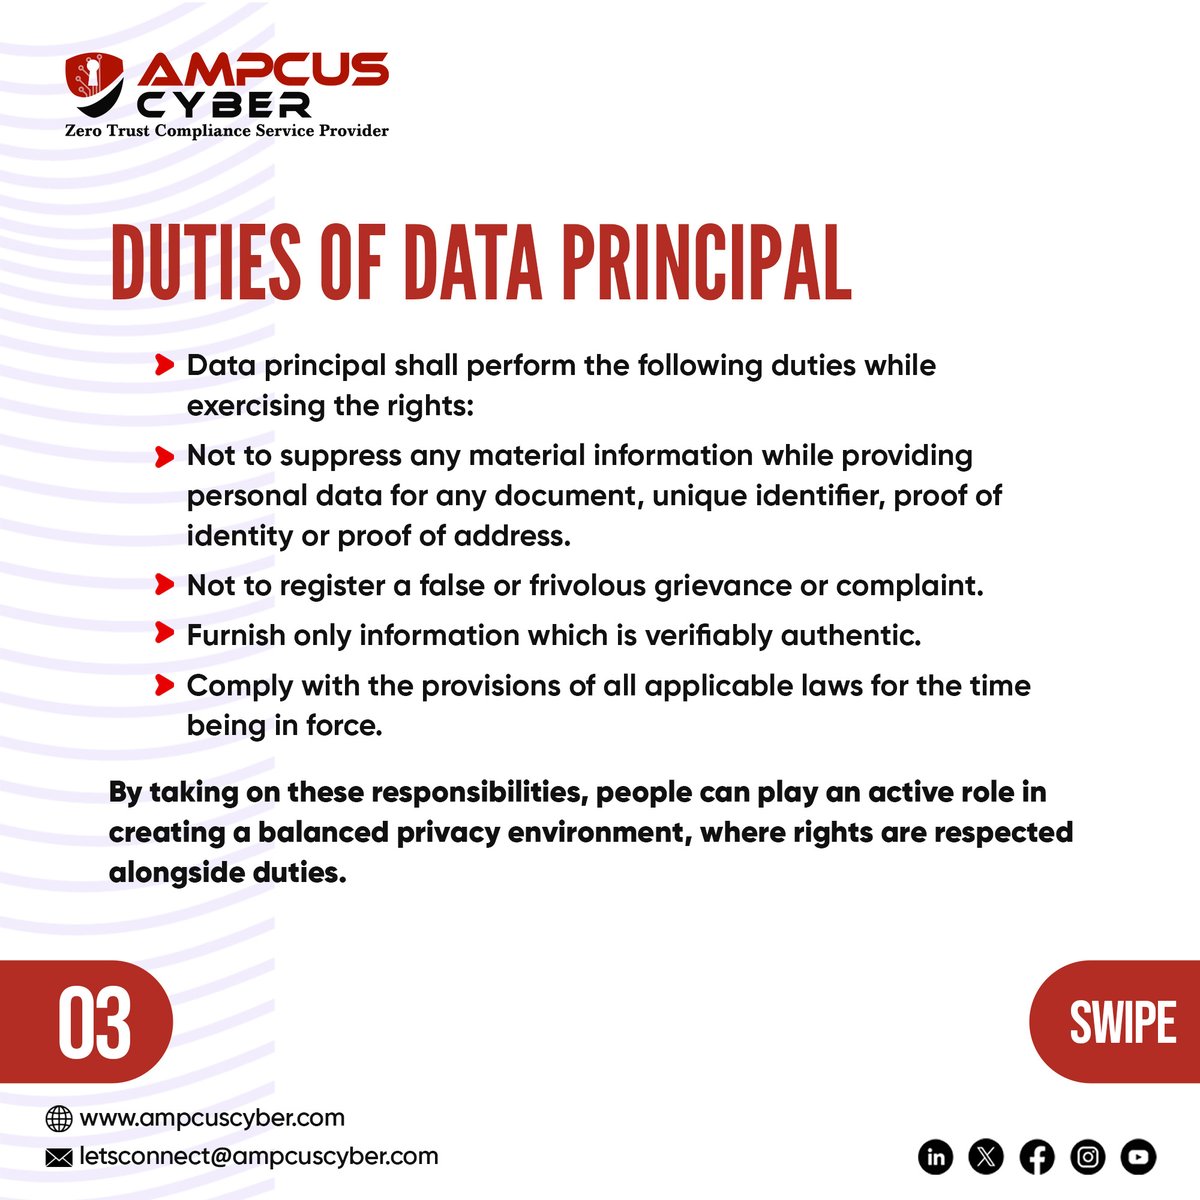 👉Swipe through to understand the Digital Personal Data Protection Act 2023. Learn about your rights and responsibilities as a data principal. Empower yourself with knowledge and take control of your personal data!🔒

#Ampcuscyber #DPDPA2023 #DataRights #DataDuties #Empowerment